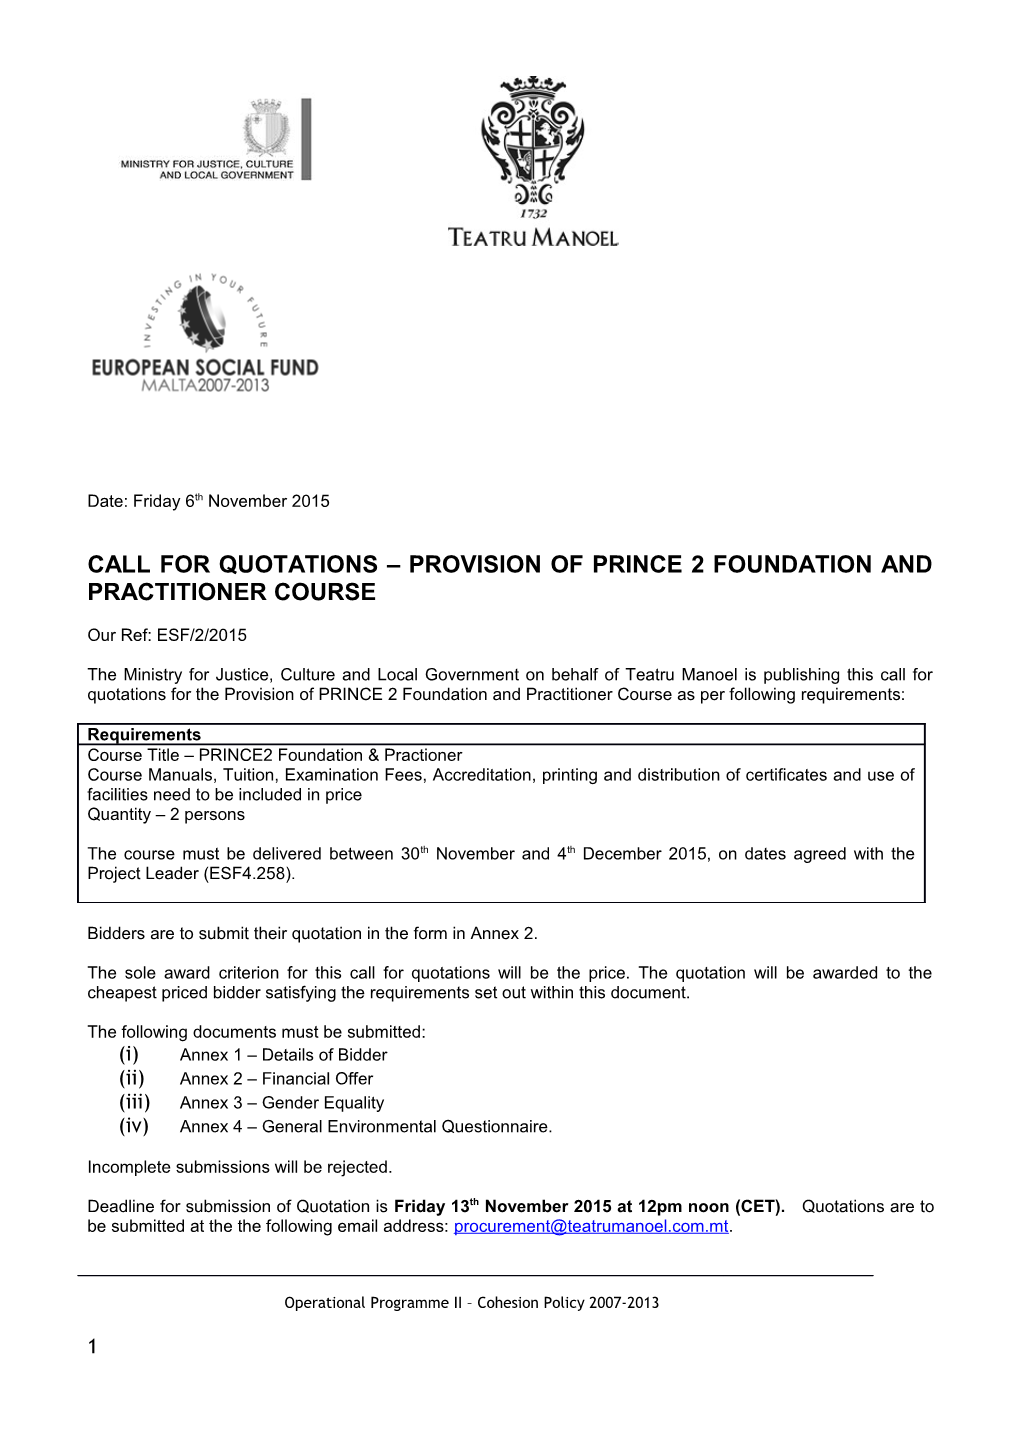 Call Forquotations Provision of Prince 2 Foundation and Practitioner Course